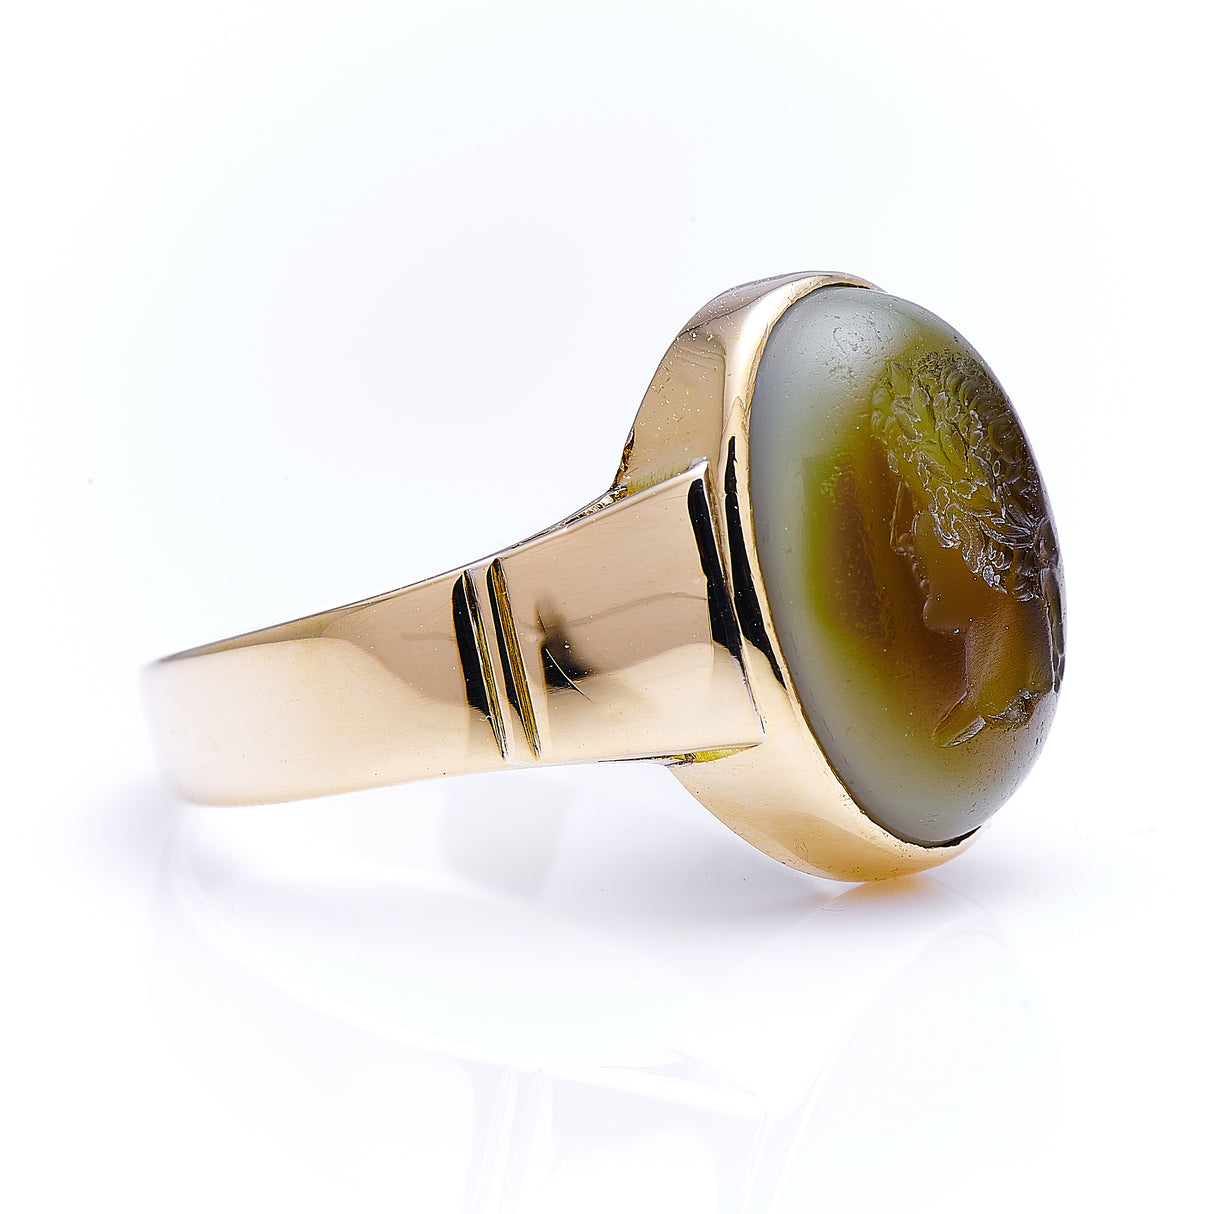 Georgian, 18ct Gold, French, Carved Intaglio Ring